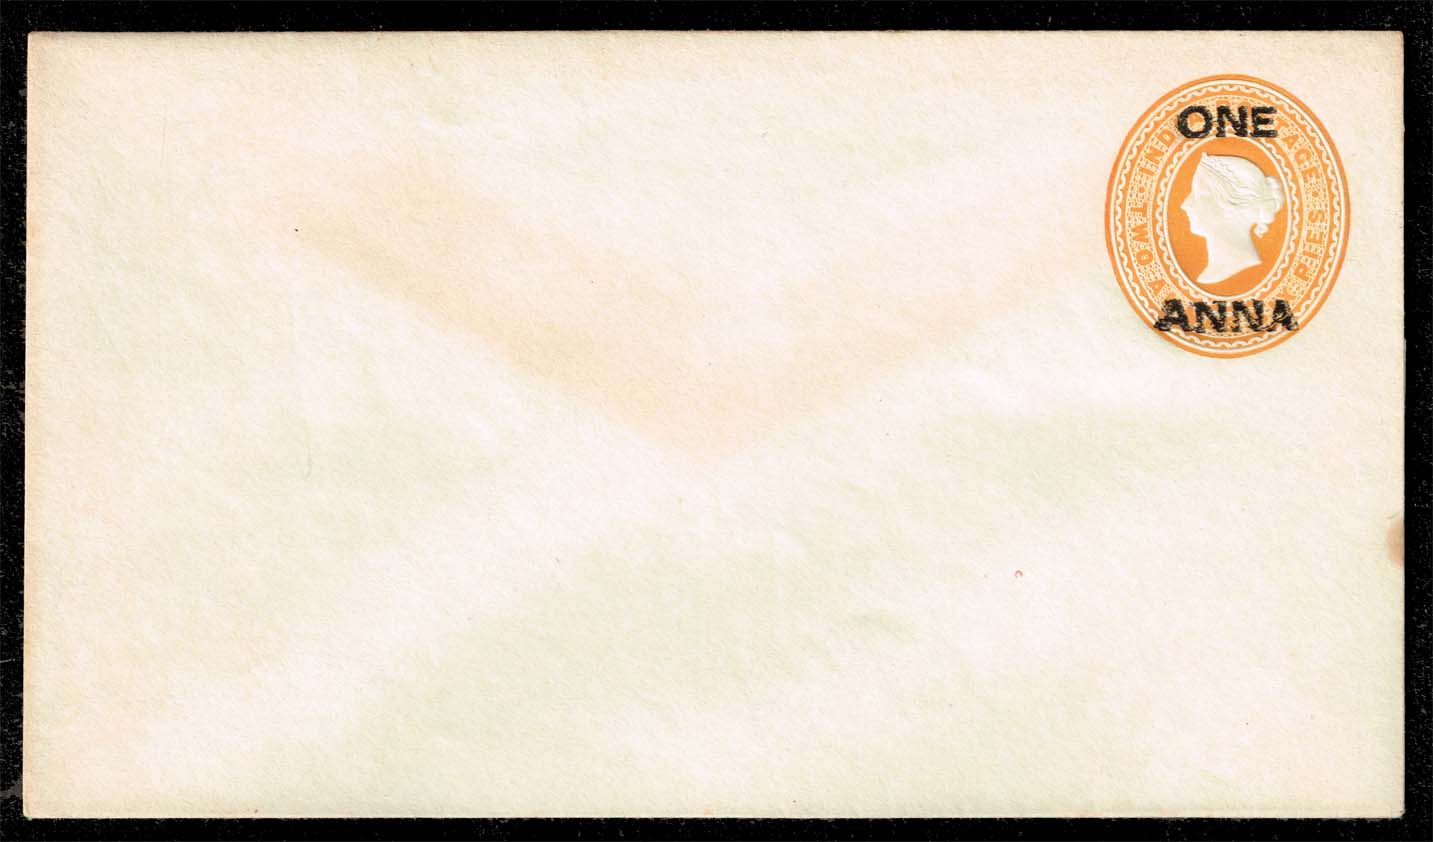 India Postal Stationery 1899 1 anna surcharge; Unused - Click Image to Close